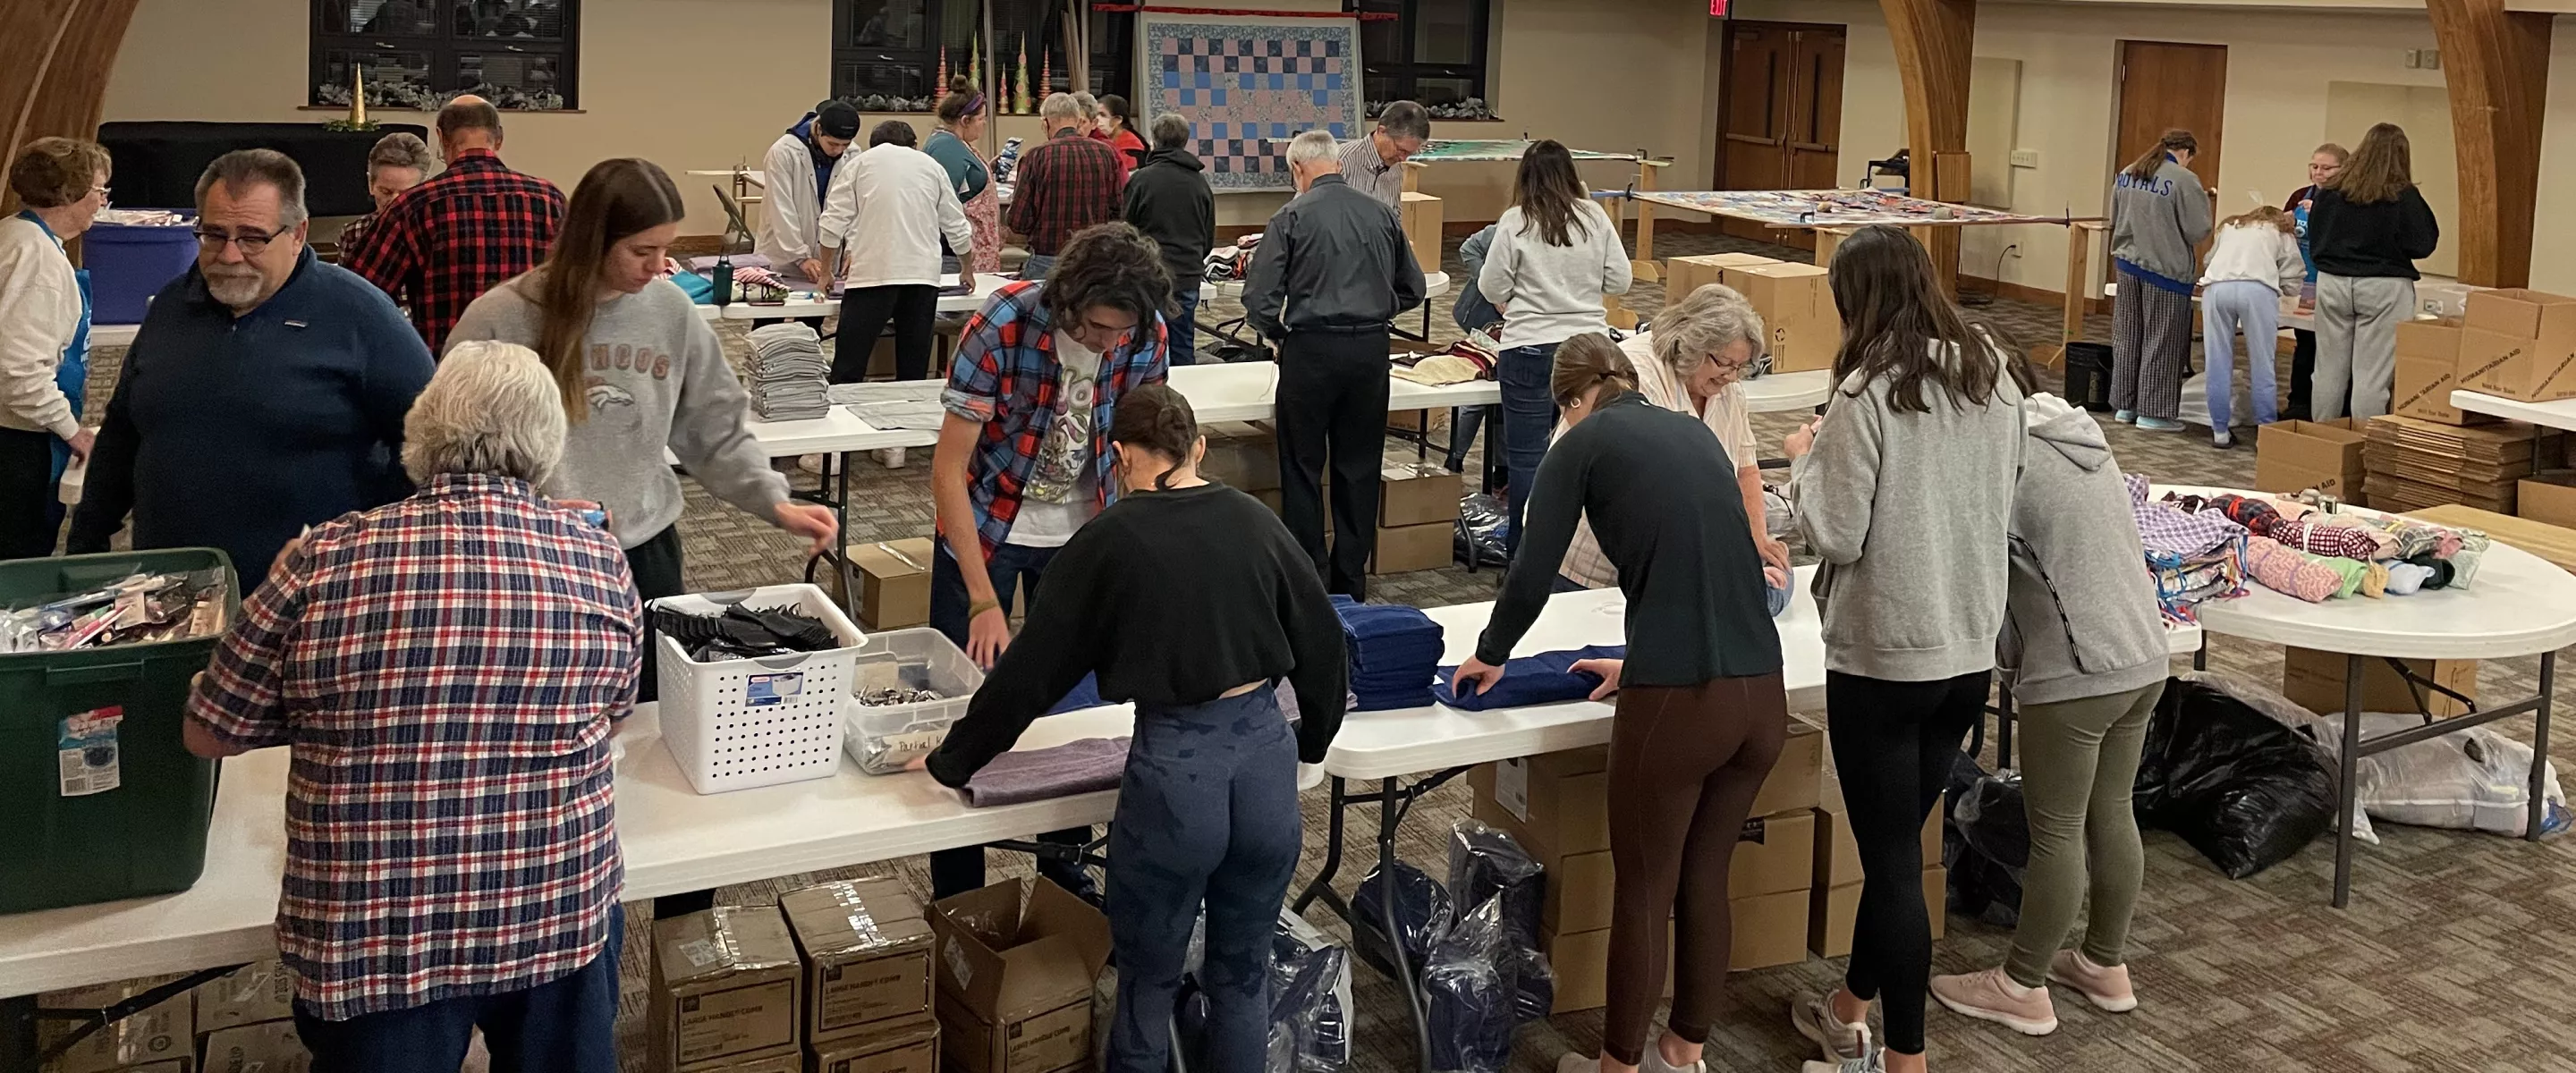  A group of volunteers assemble hygiene kits in large room.